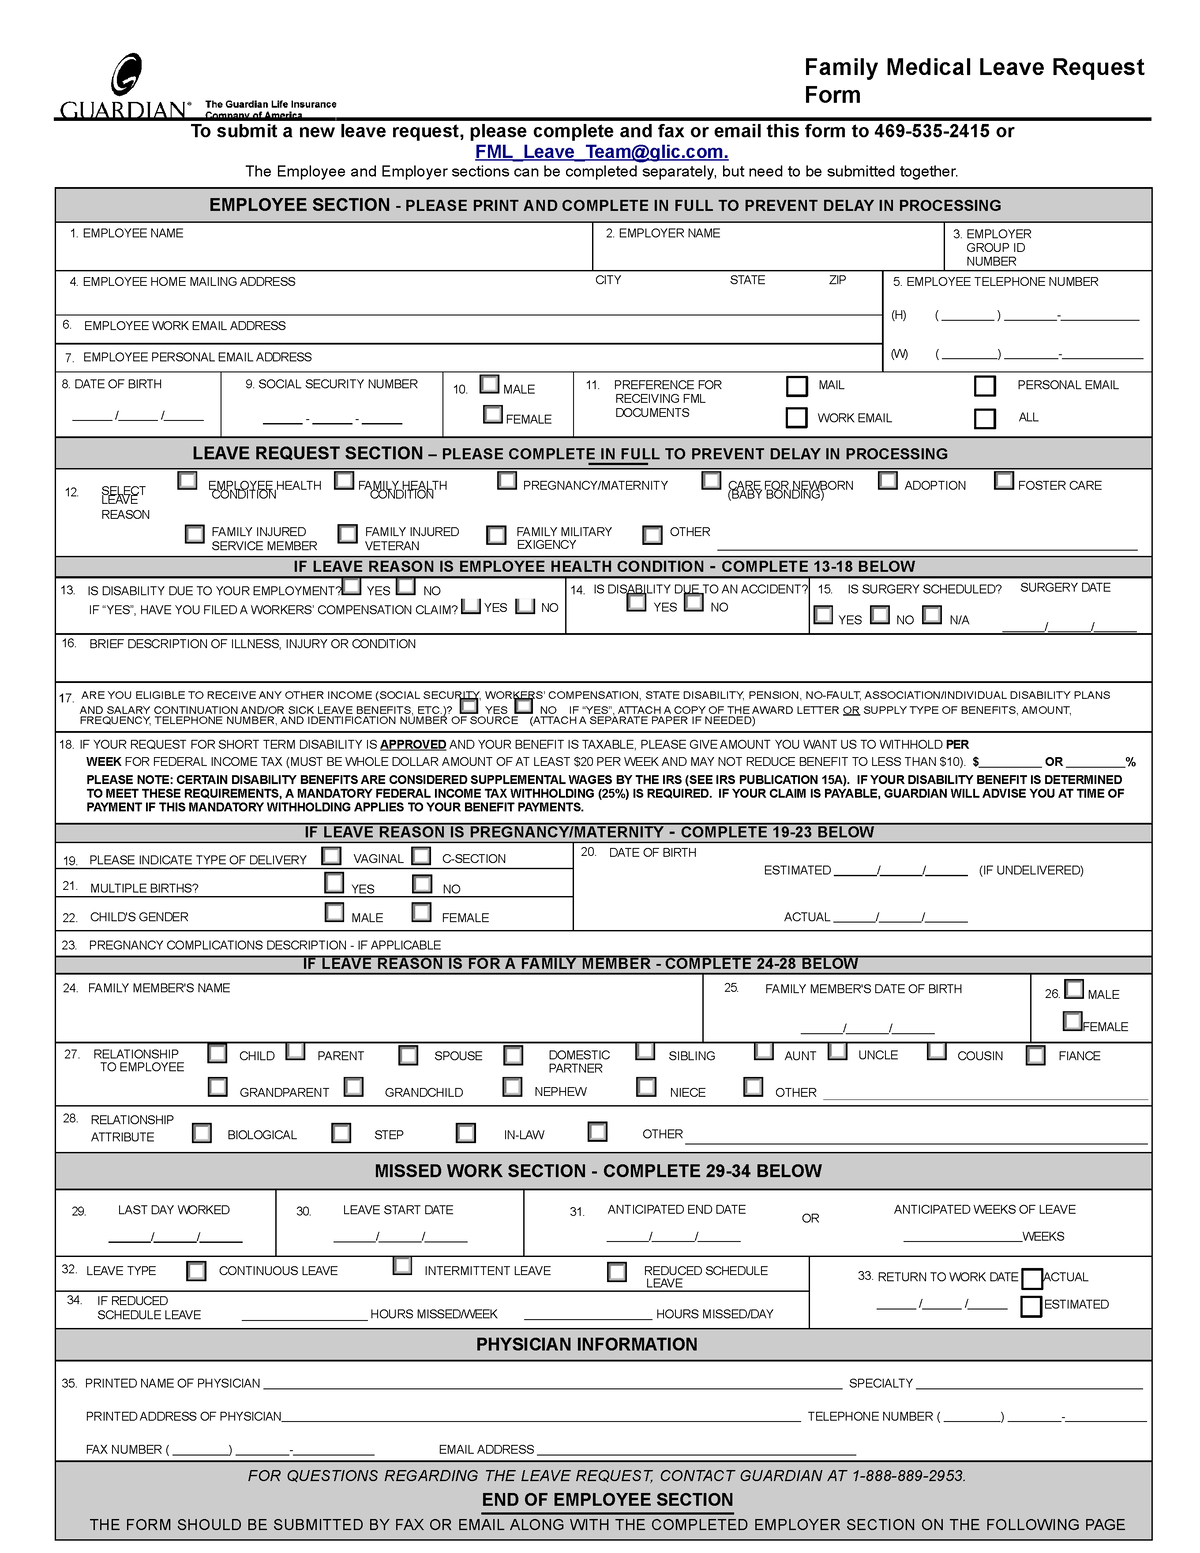 FMLA Request Form - Notes - Family Medical Leave Request Form To submit ...